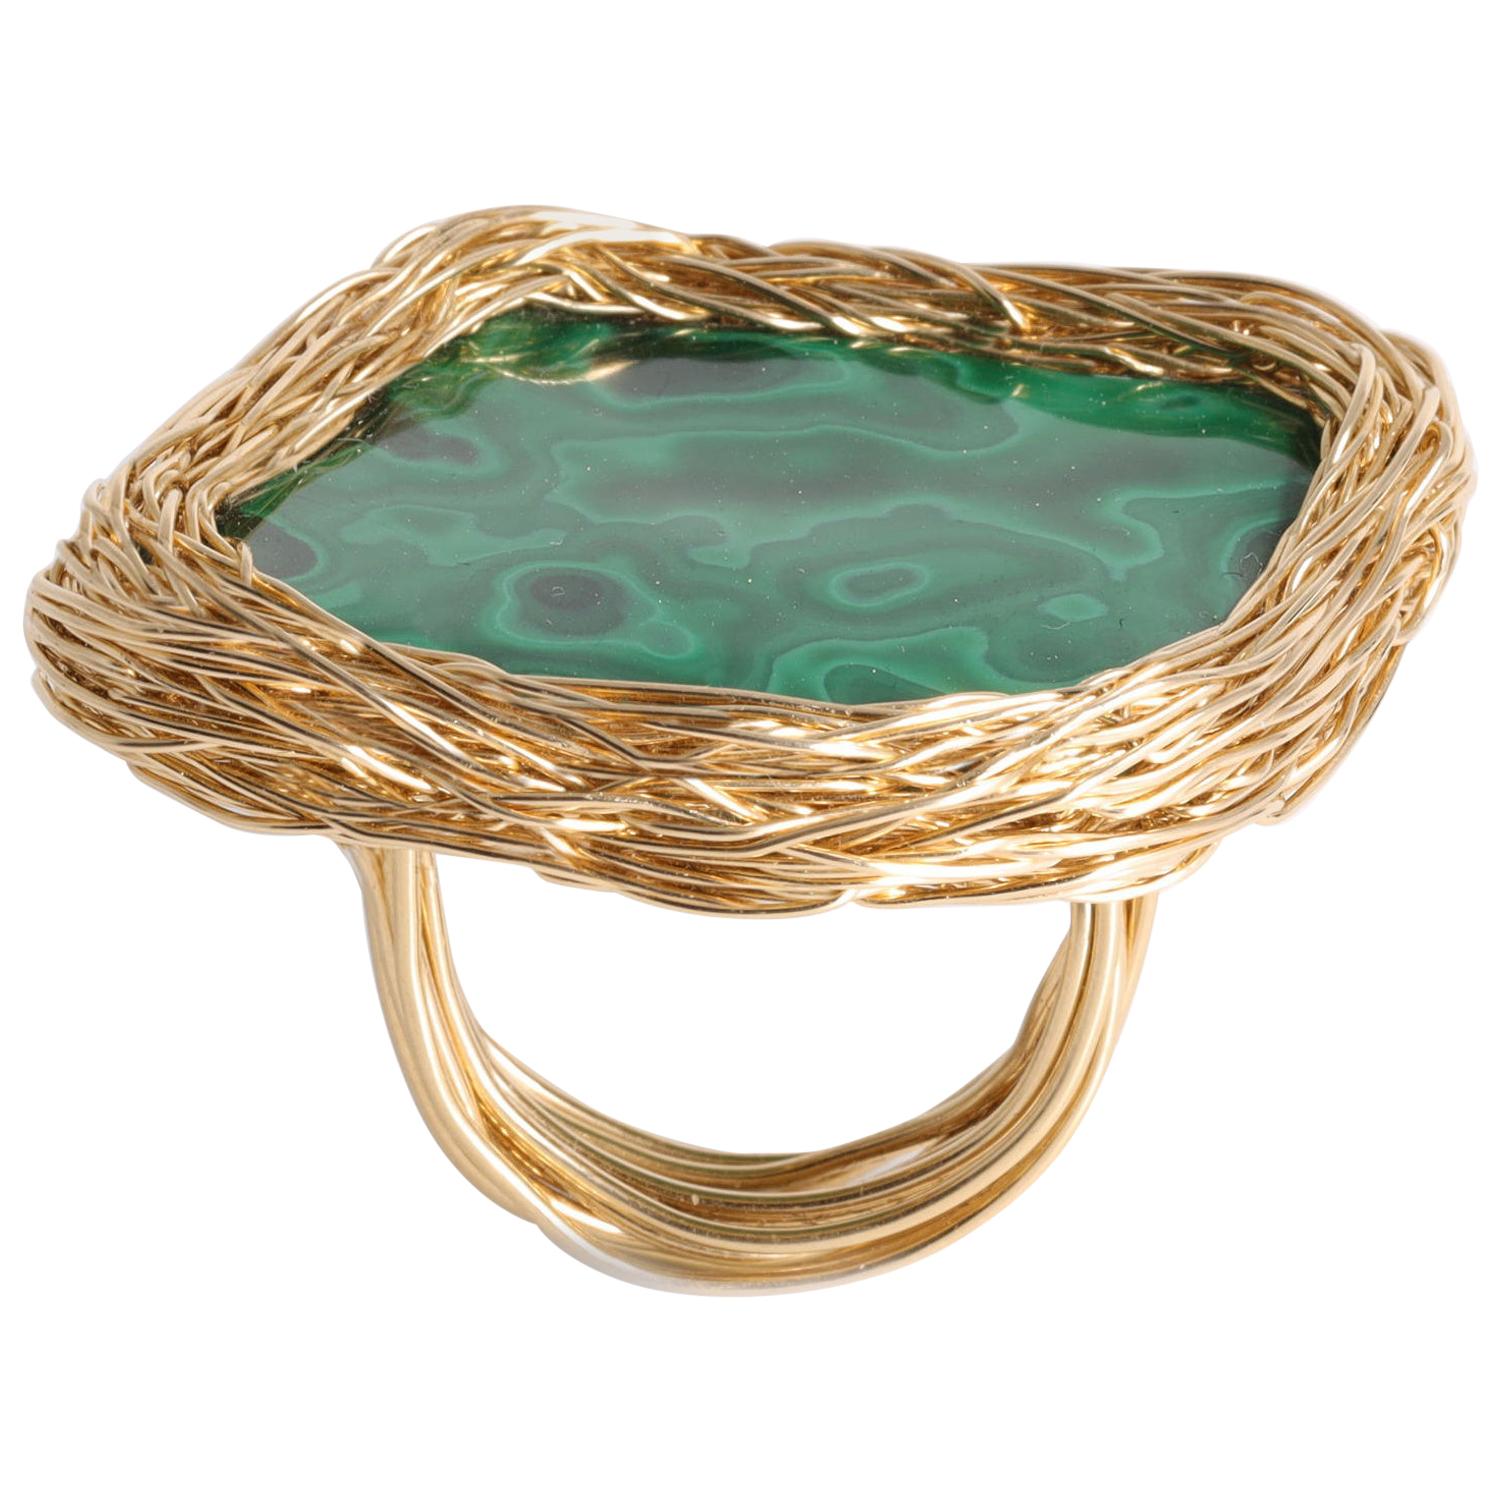 Greenest Gold and Malachite Statement Cocktail Ring by Sheila Westera London